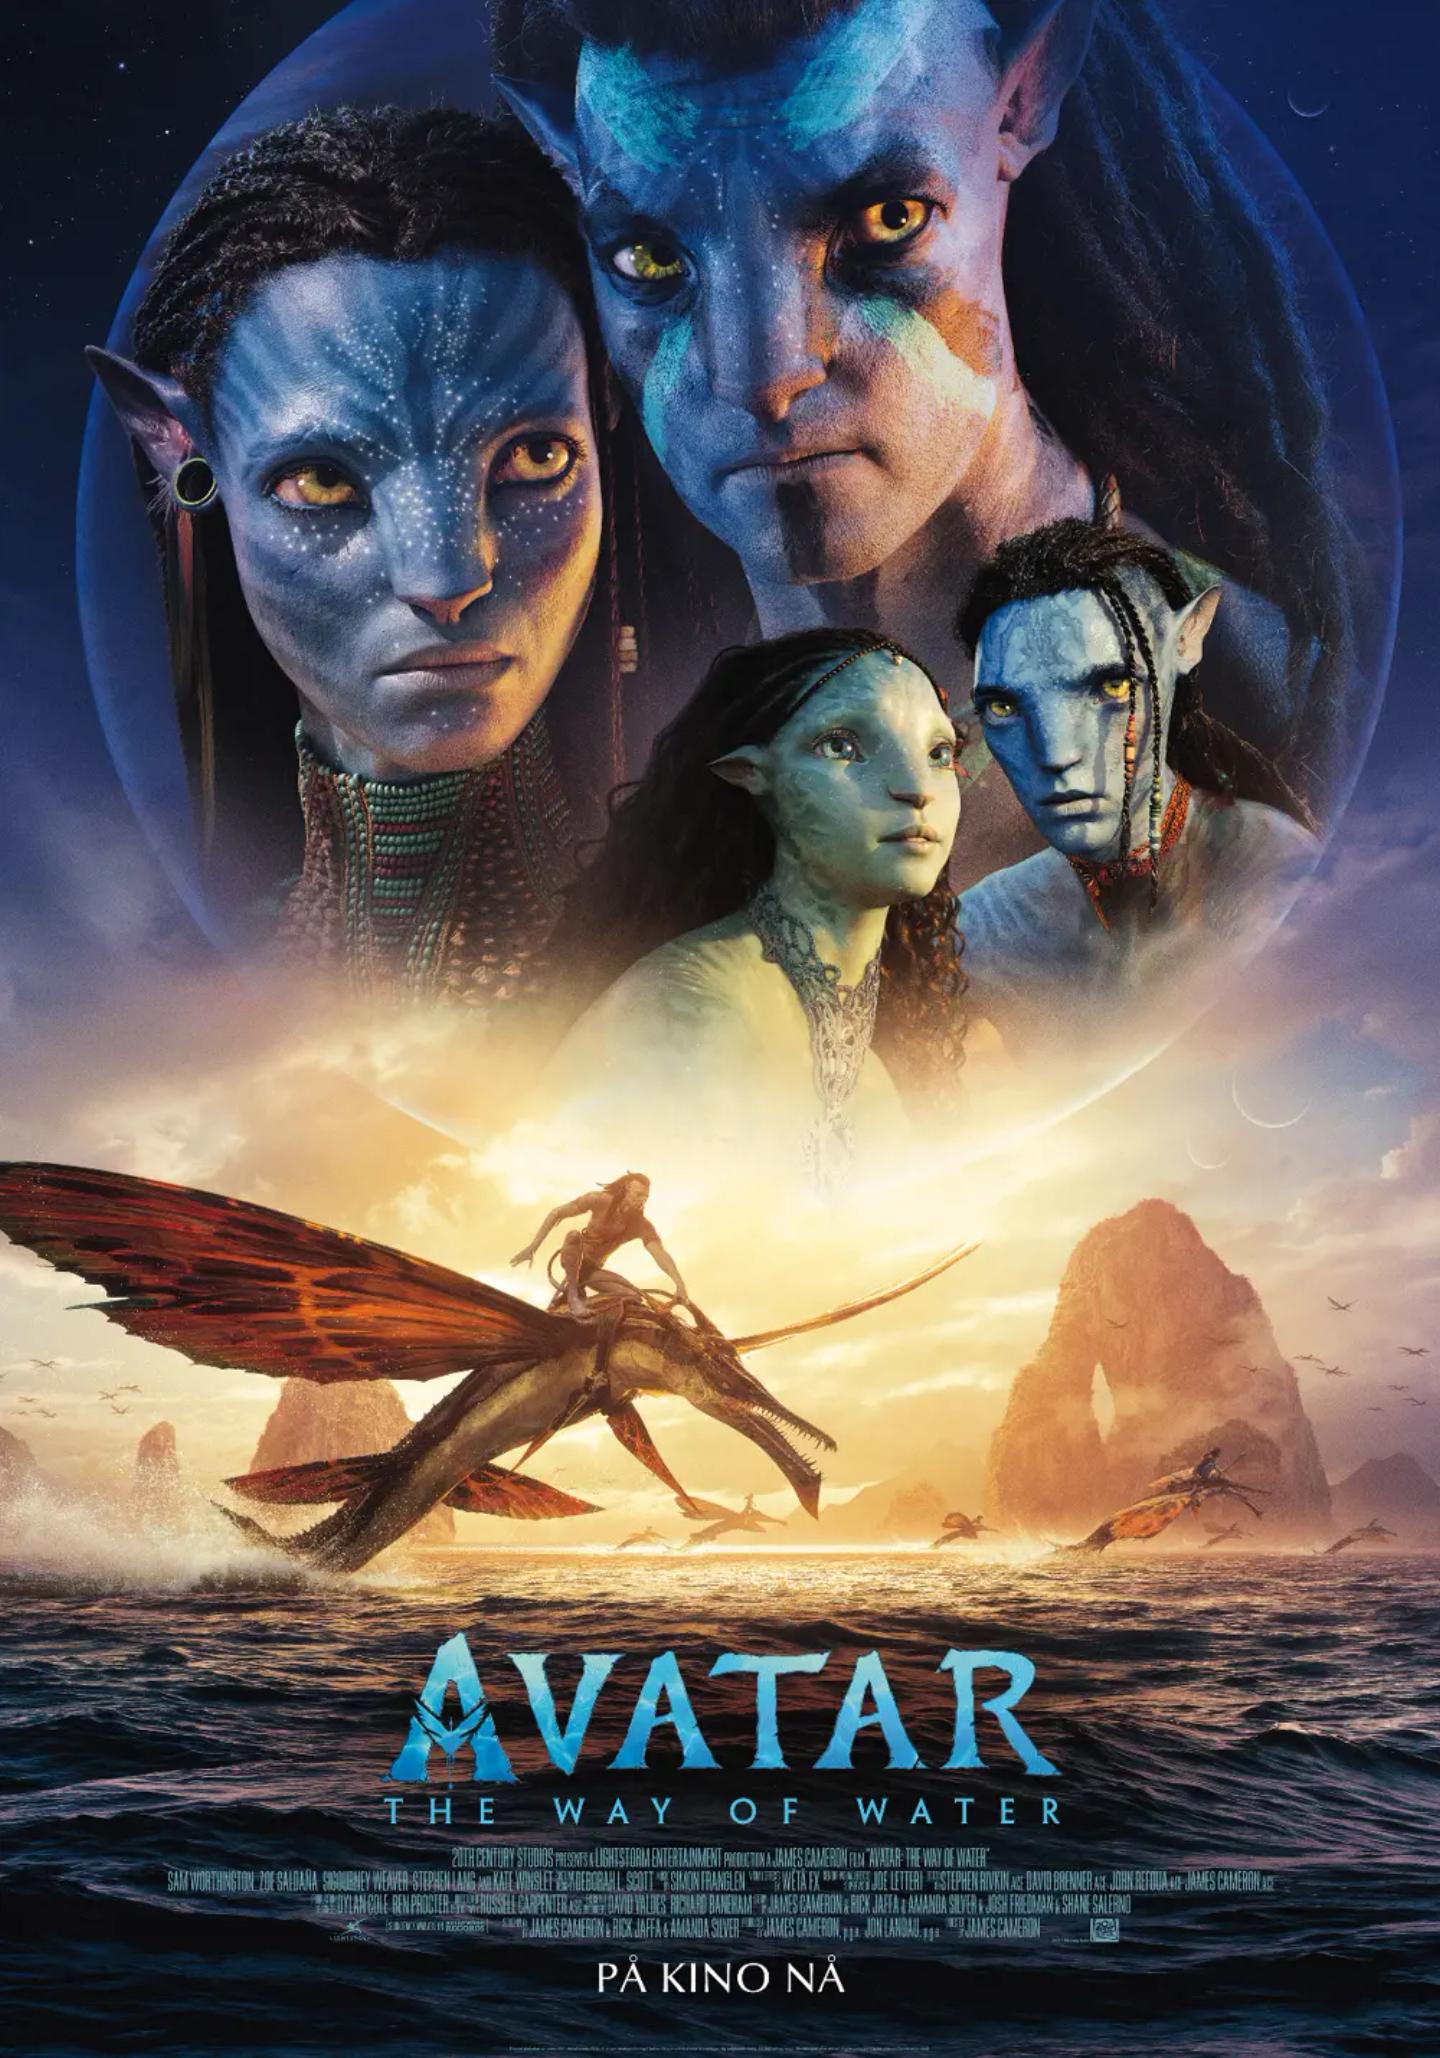 Plakat for 'Avatar: The Way of Water'